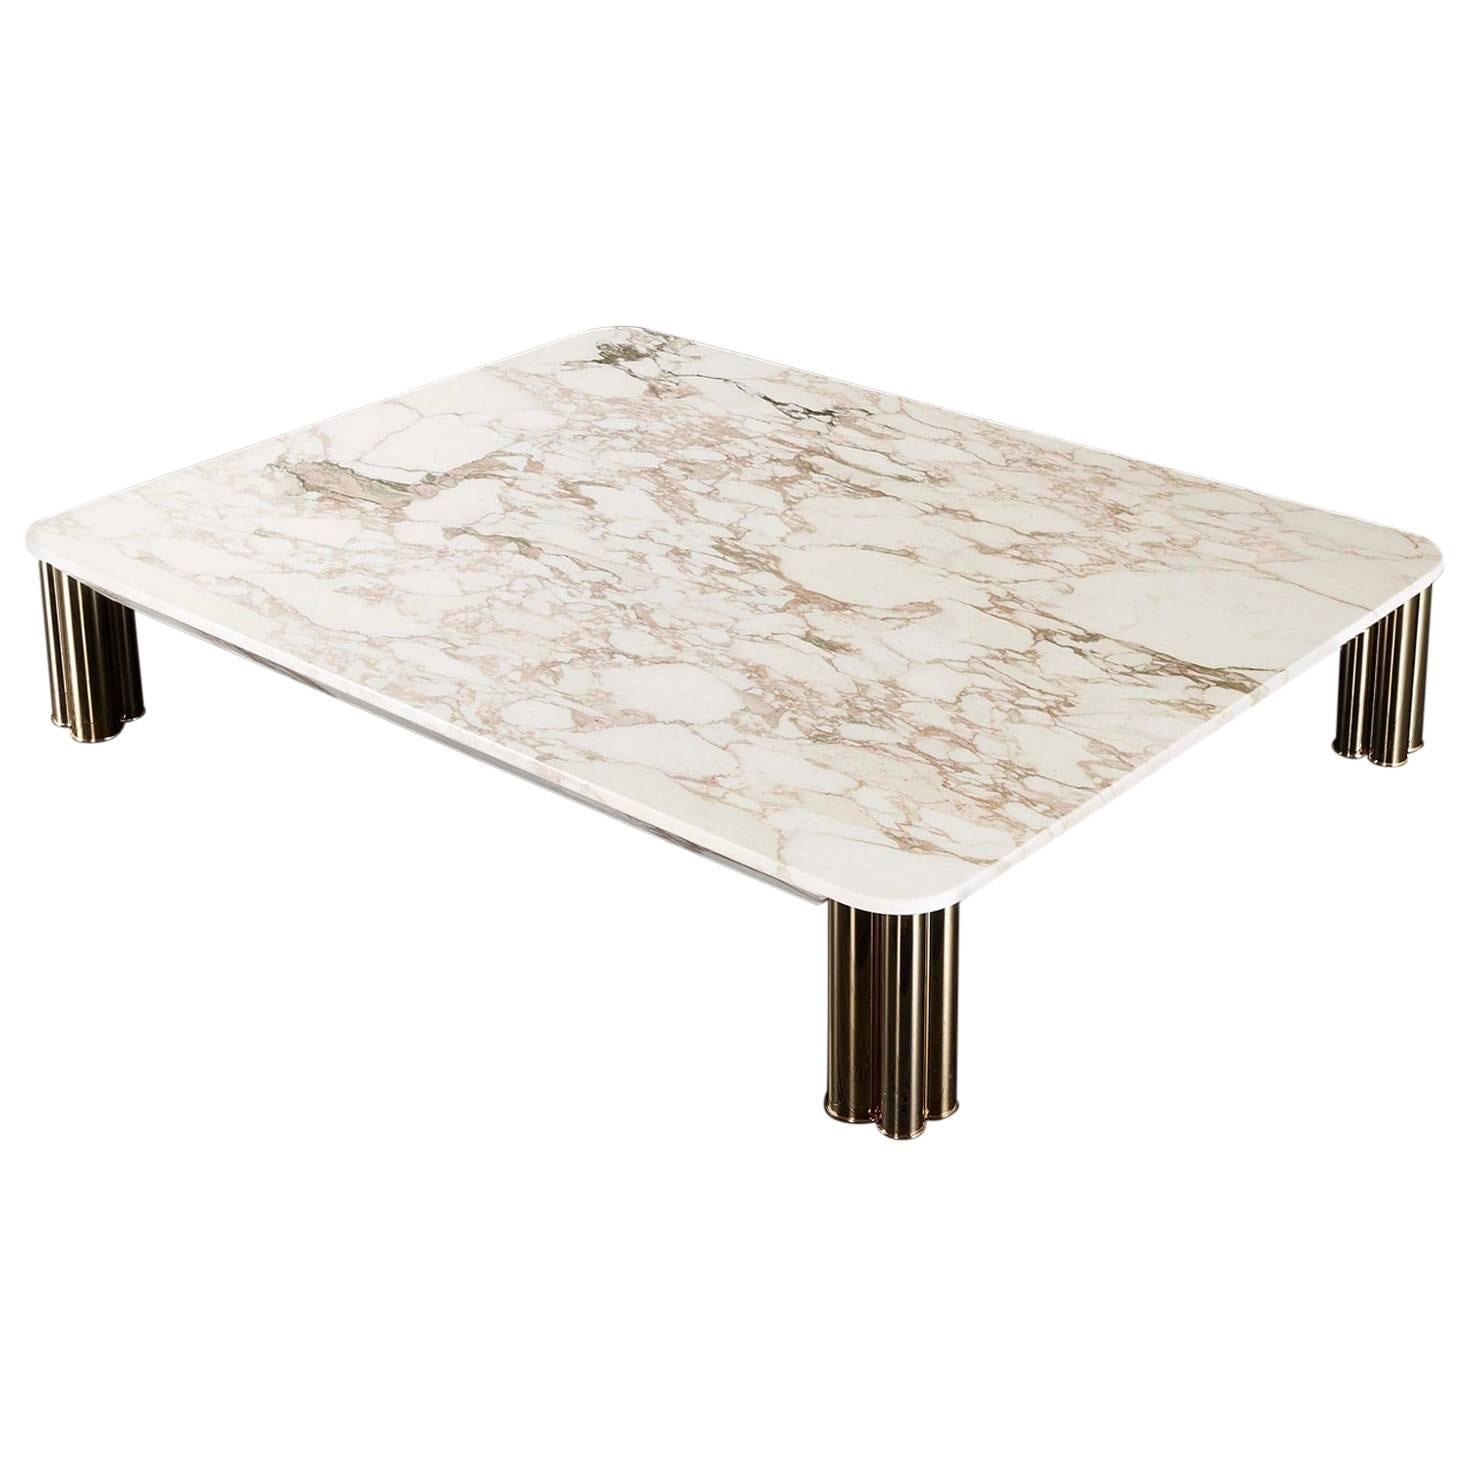 Ambra Coffee Table with Calacatta Oro Marble Top or Other Finishes